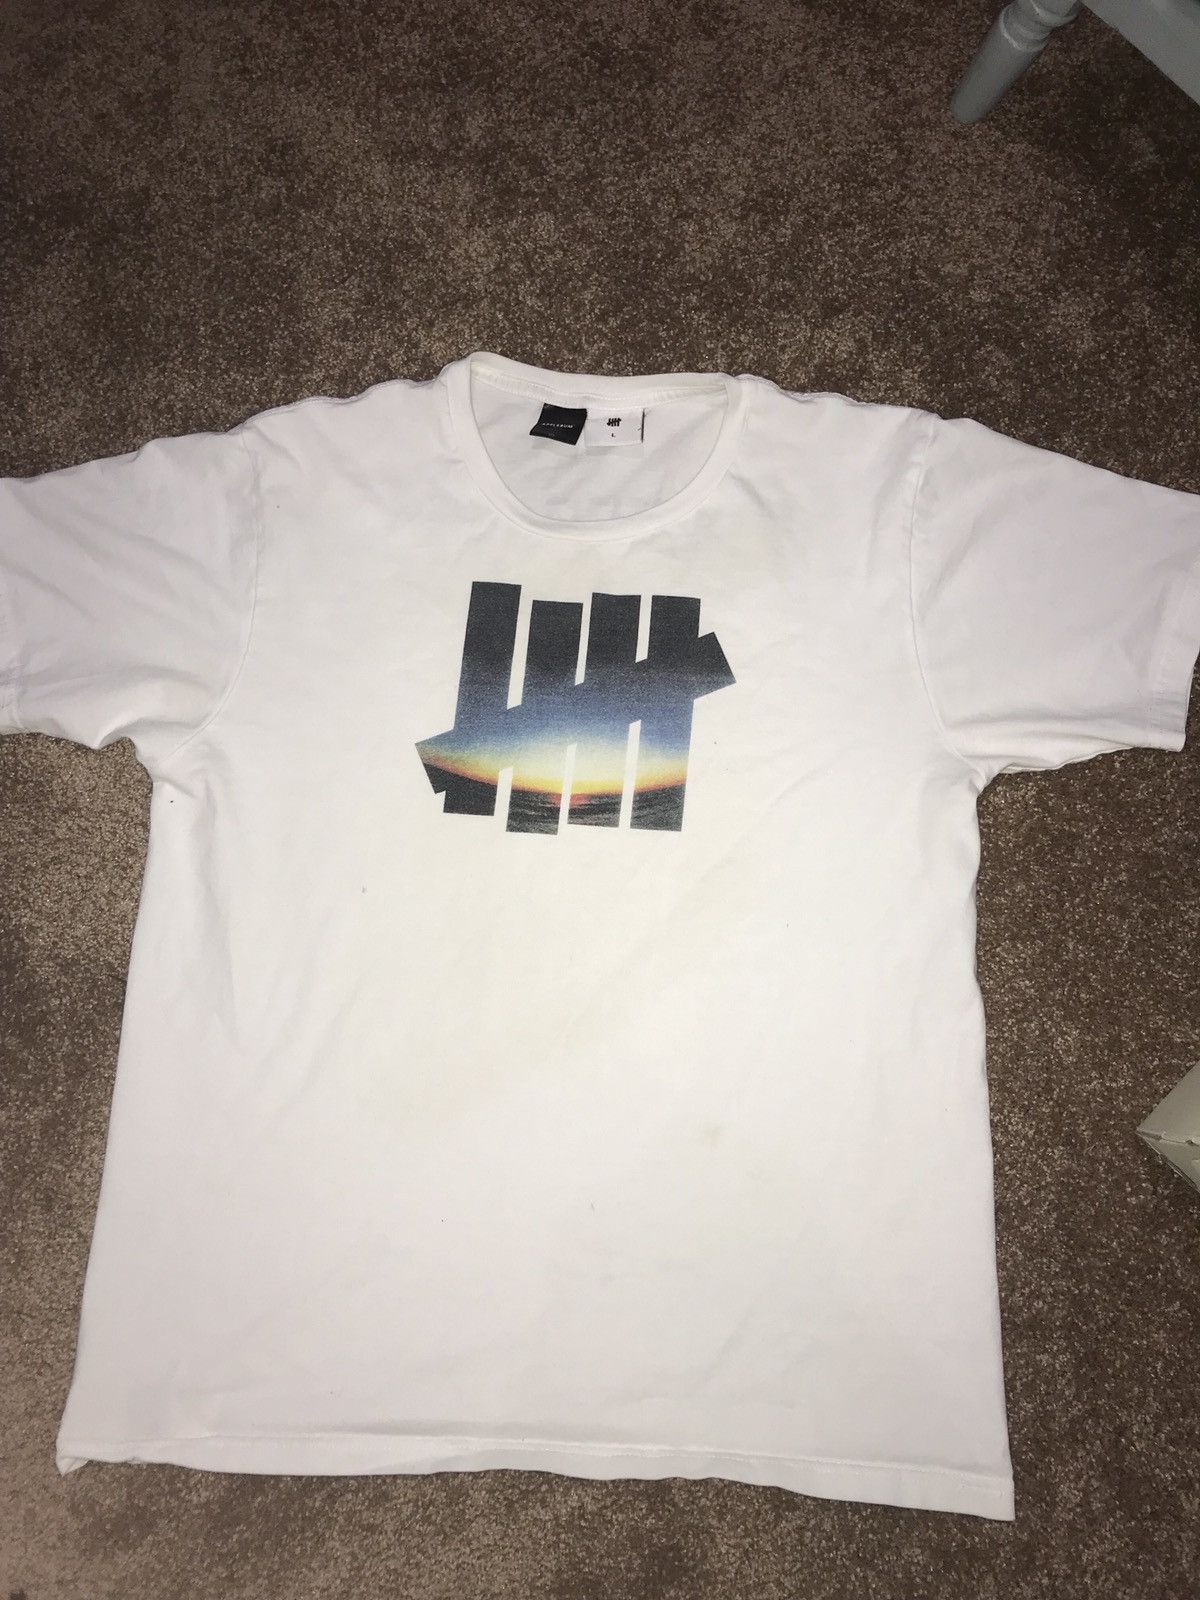 Undefeated UNDFT Undefeated X Applebum Tee Size L | Grailed